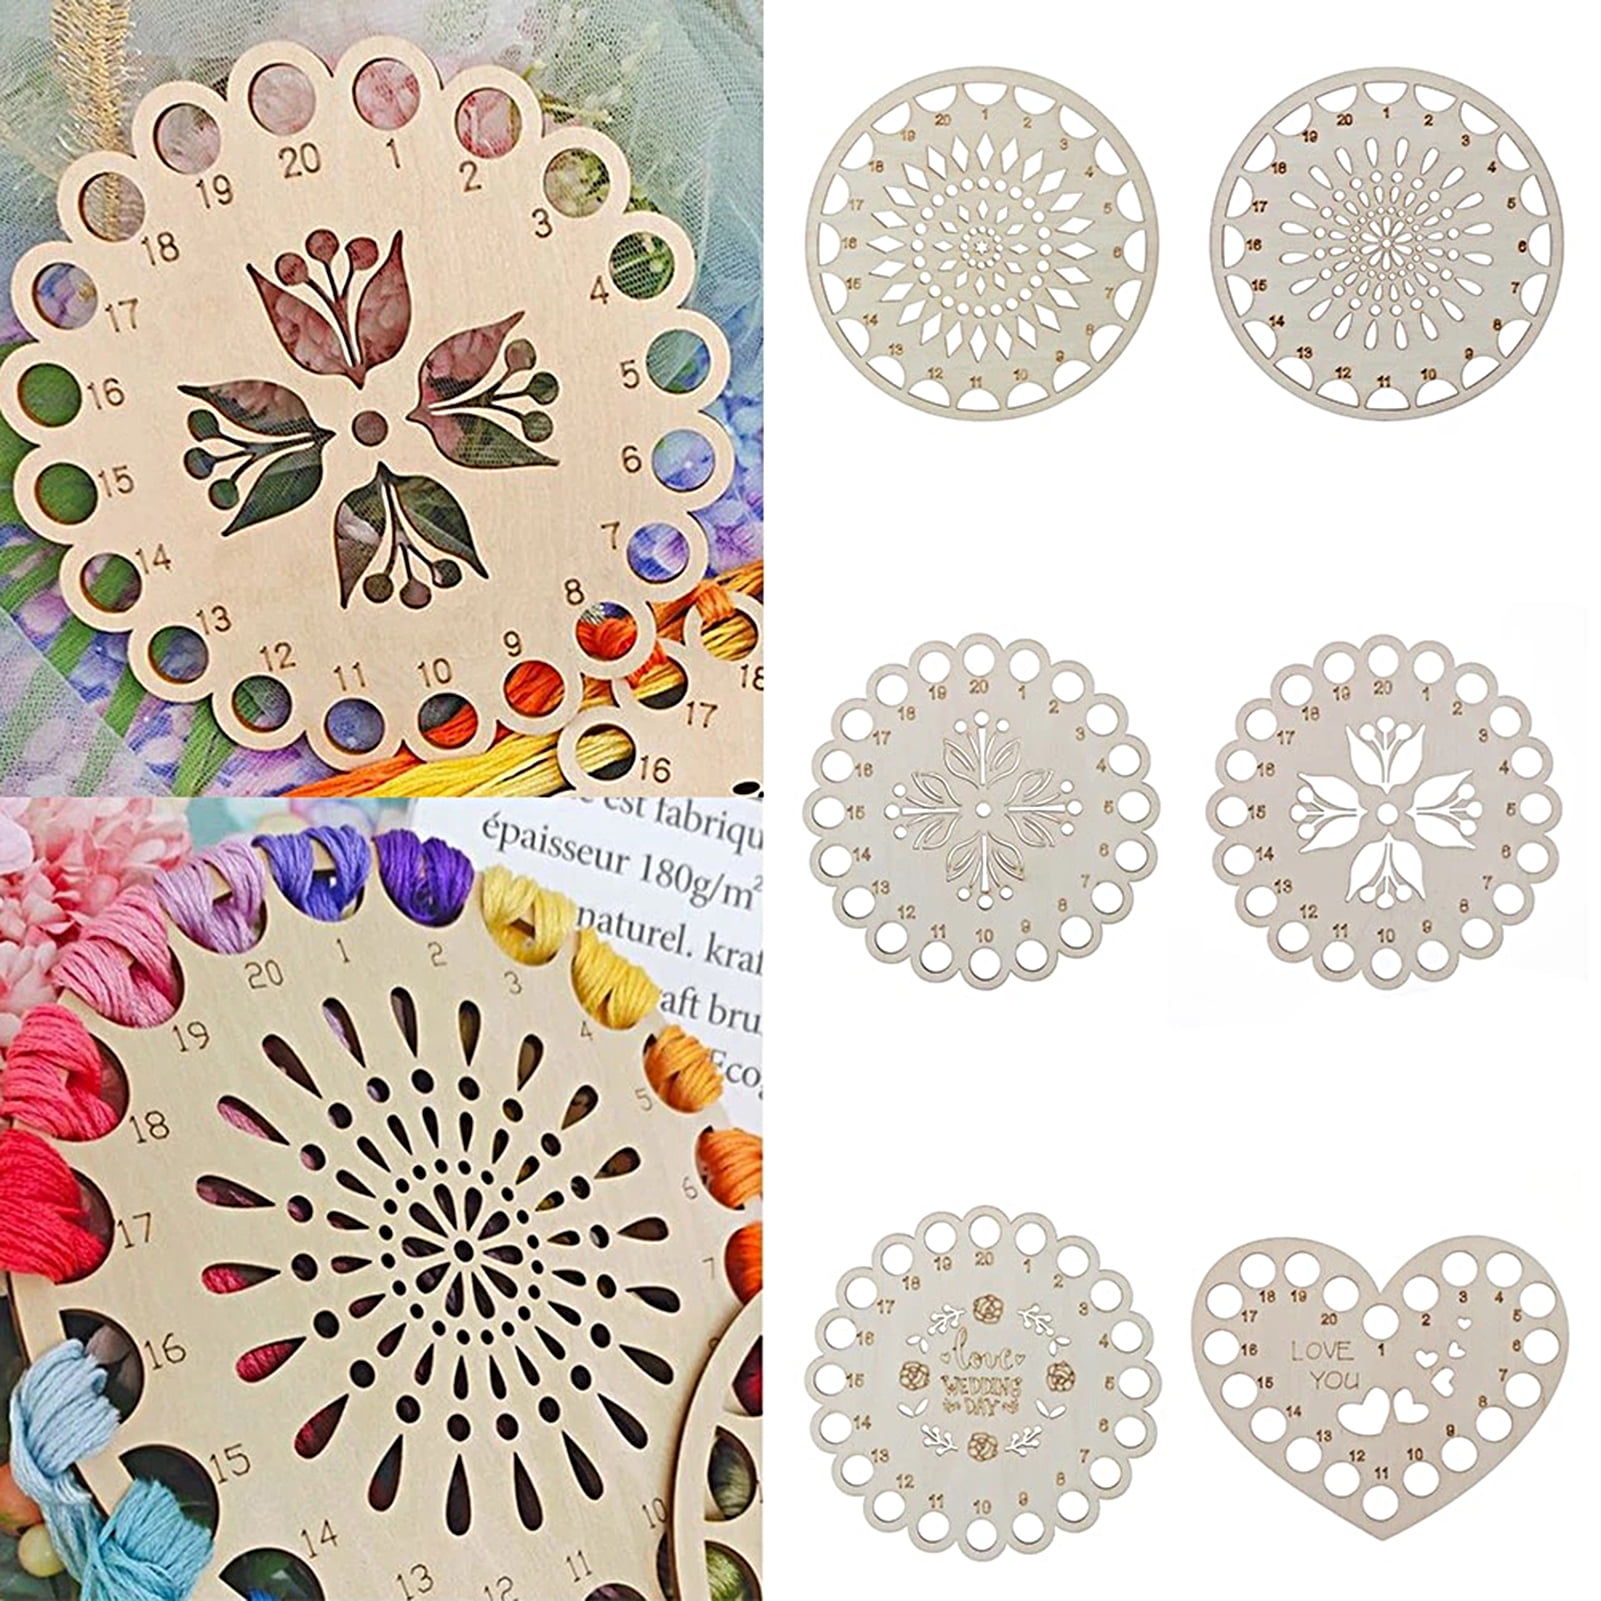 Lonjew Floral Round Thread Organizer with Needle Magnet, Filigree Wood Flower, Embroidery Sewing Floss Yarn Holder, Decorative Cross Stitch Keeper